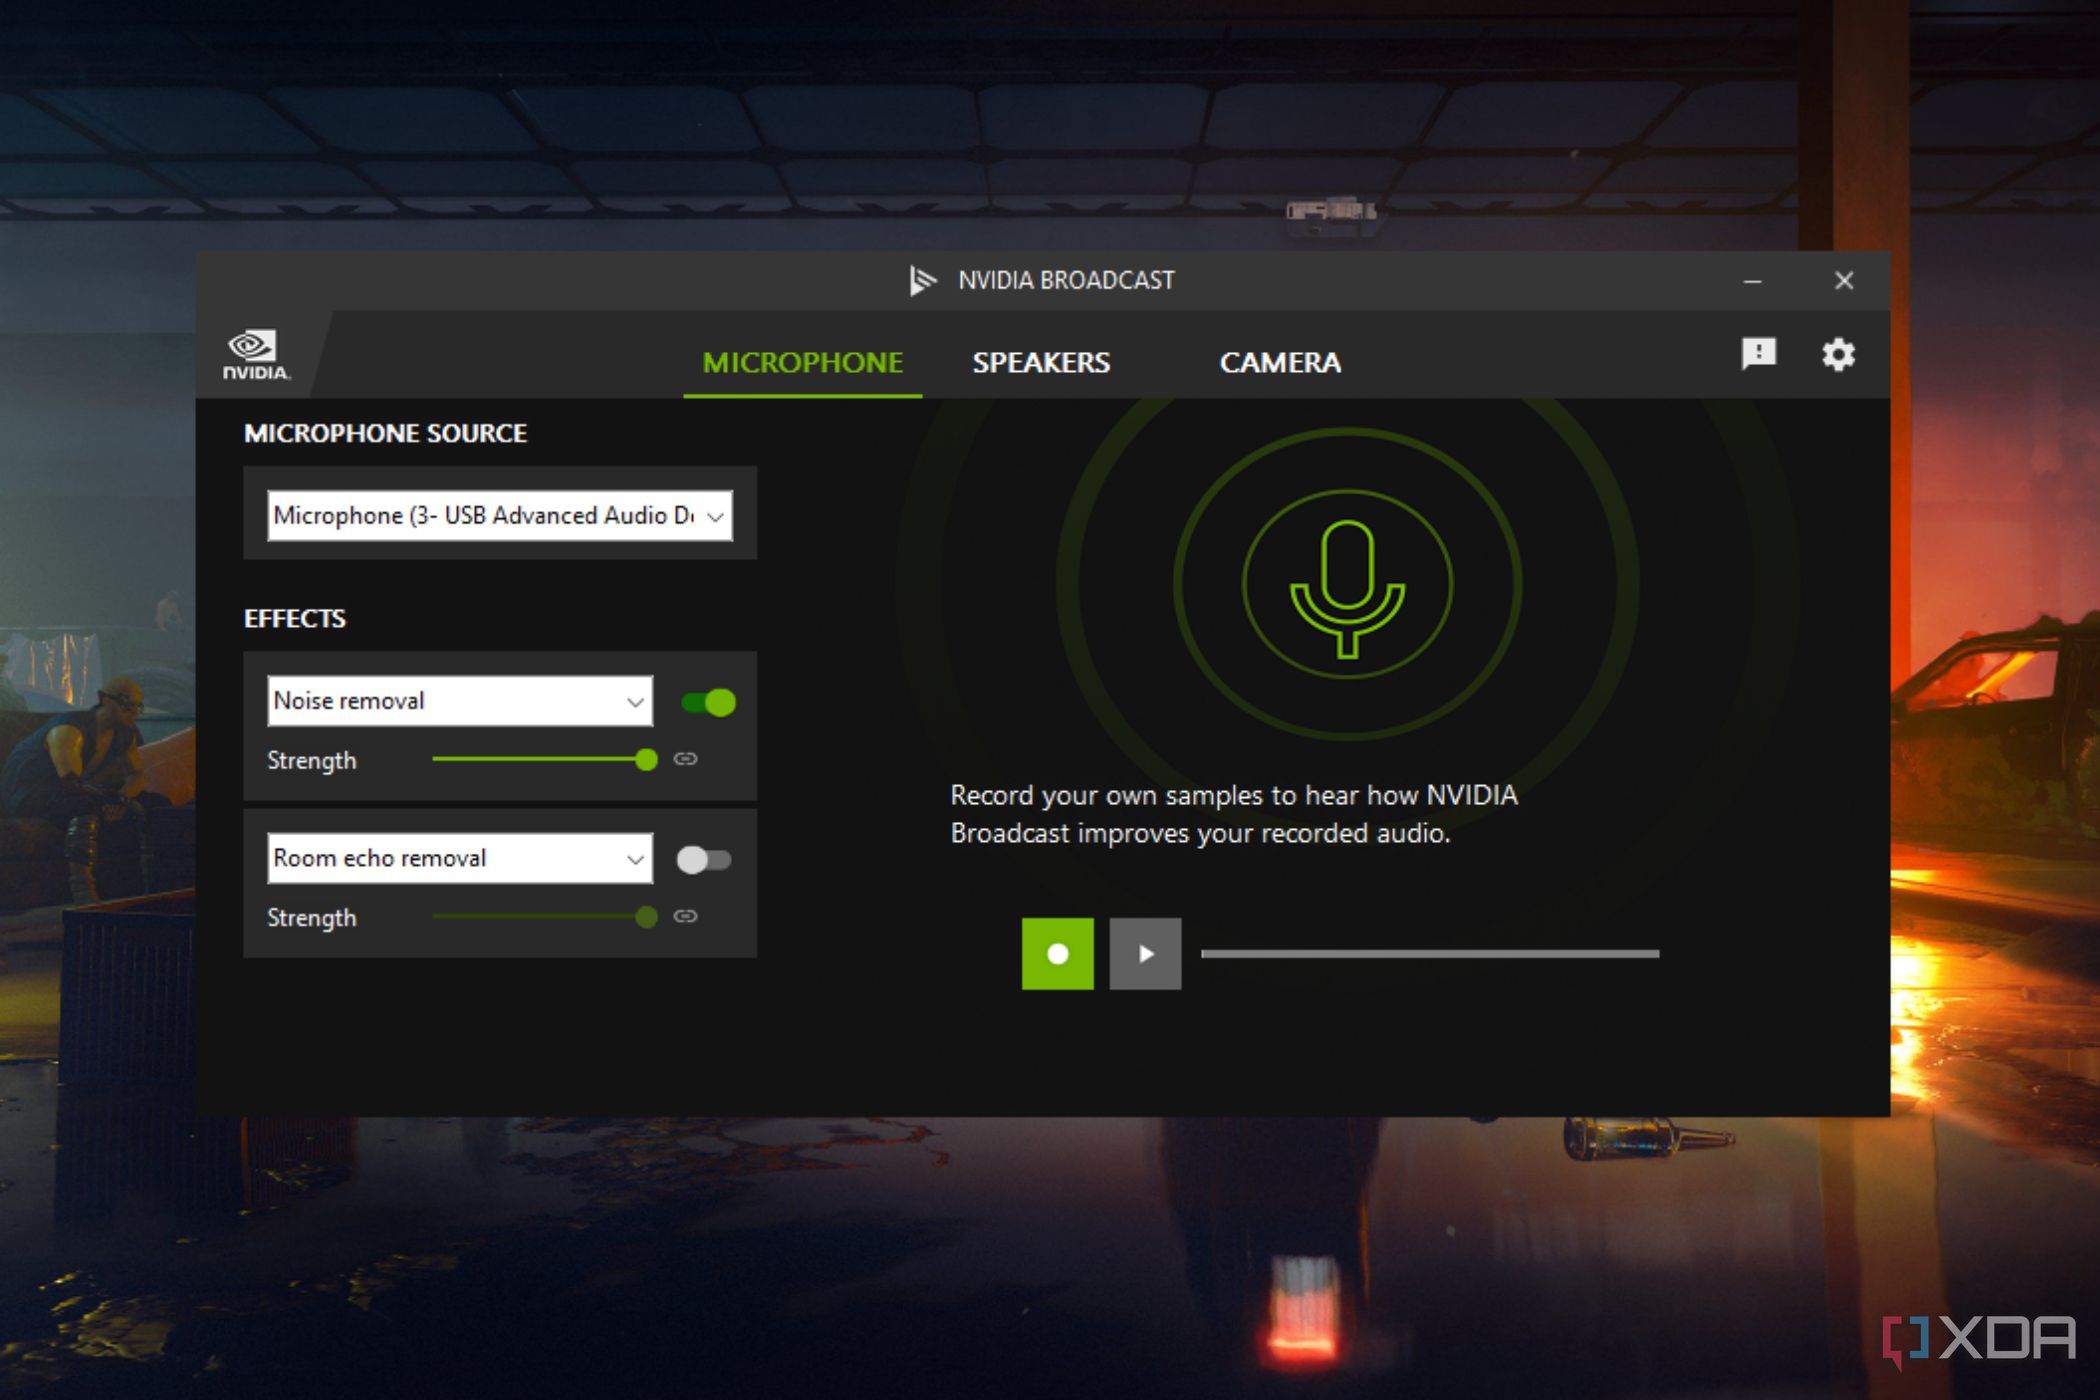 A screenshot showing the Nvidia Broadcast tool showing microphone settings.